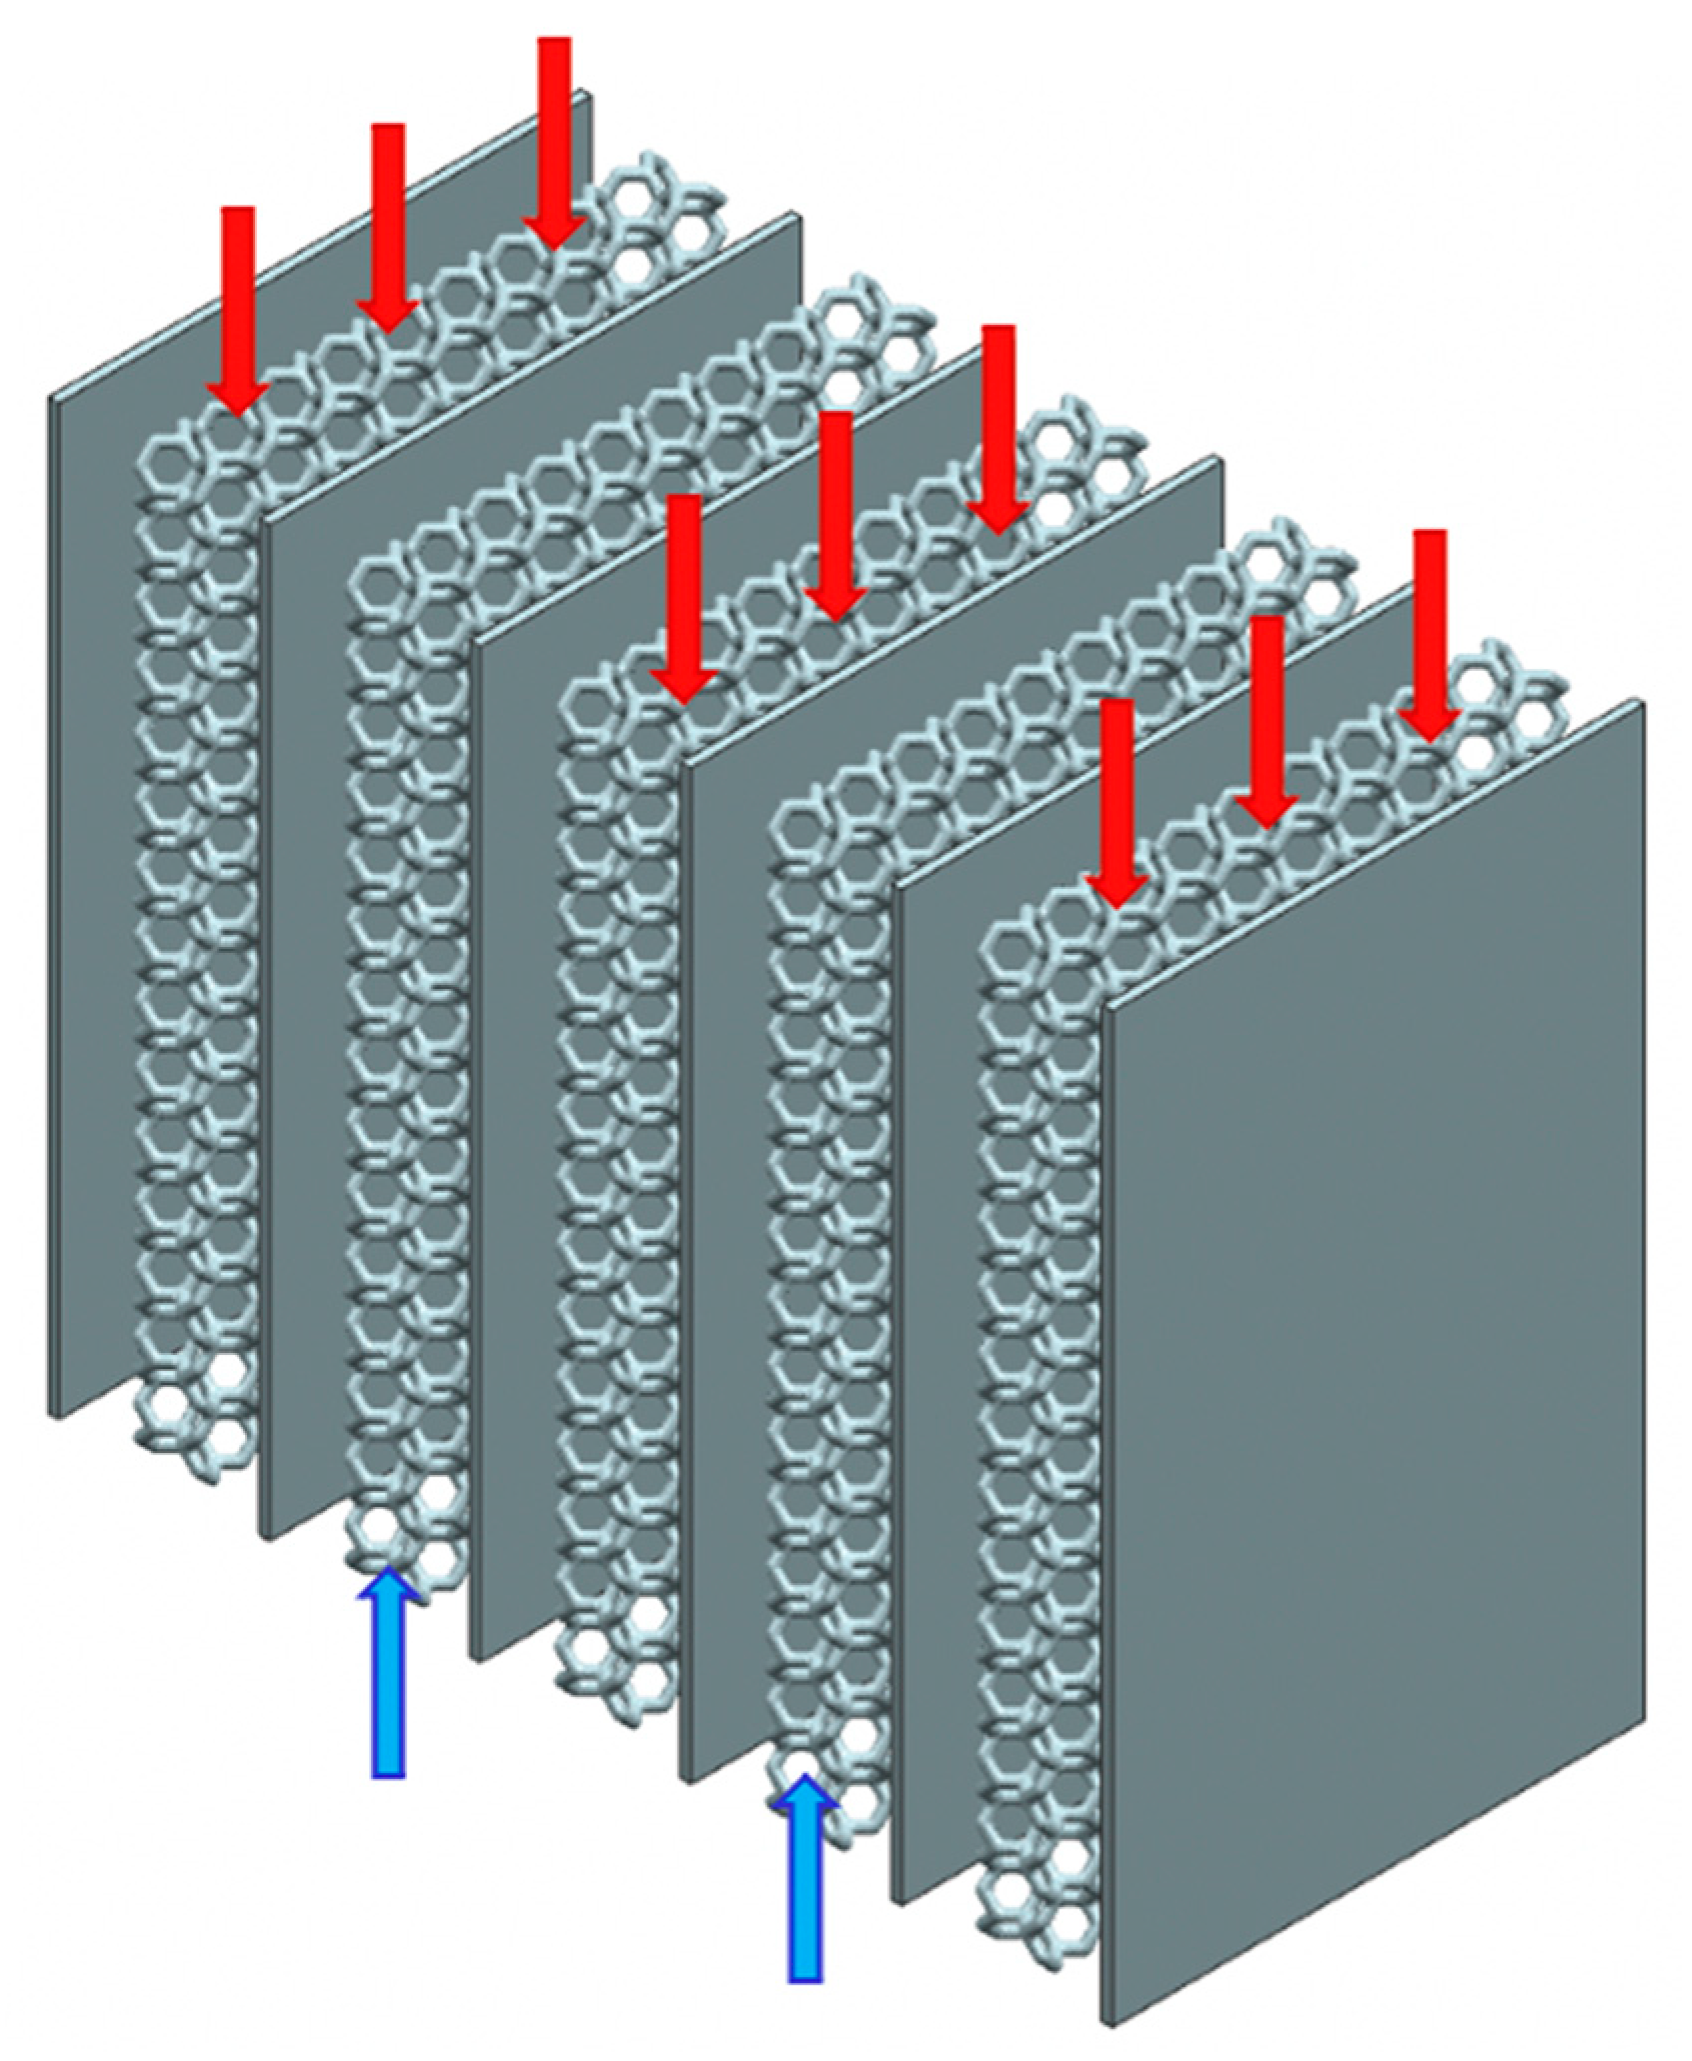 Materials | Free Full-Text | Application of Ceramic Lattice Structures to  Design Compact, High Temperature Heat Exchangers: Material and Architecture  Selection